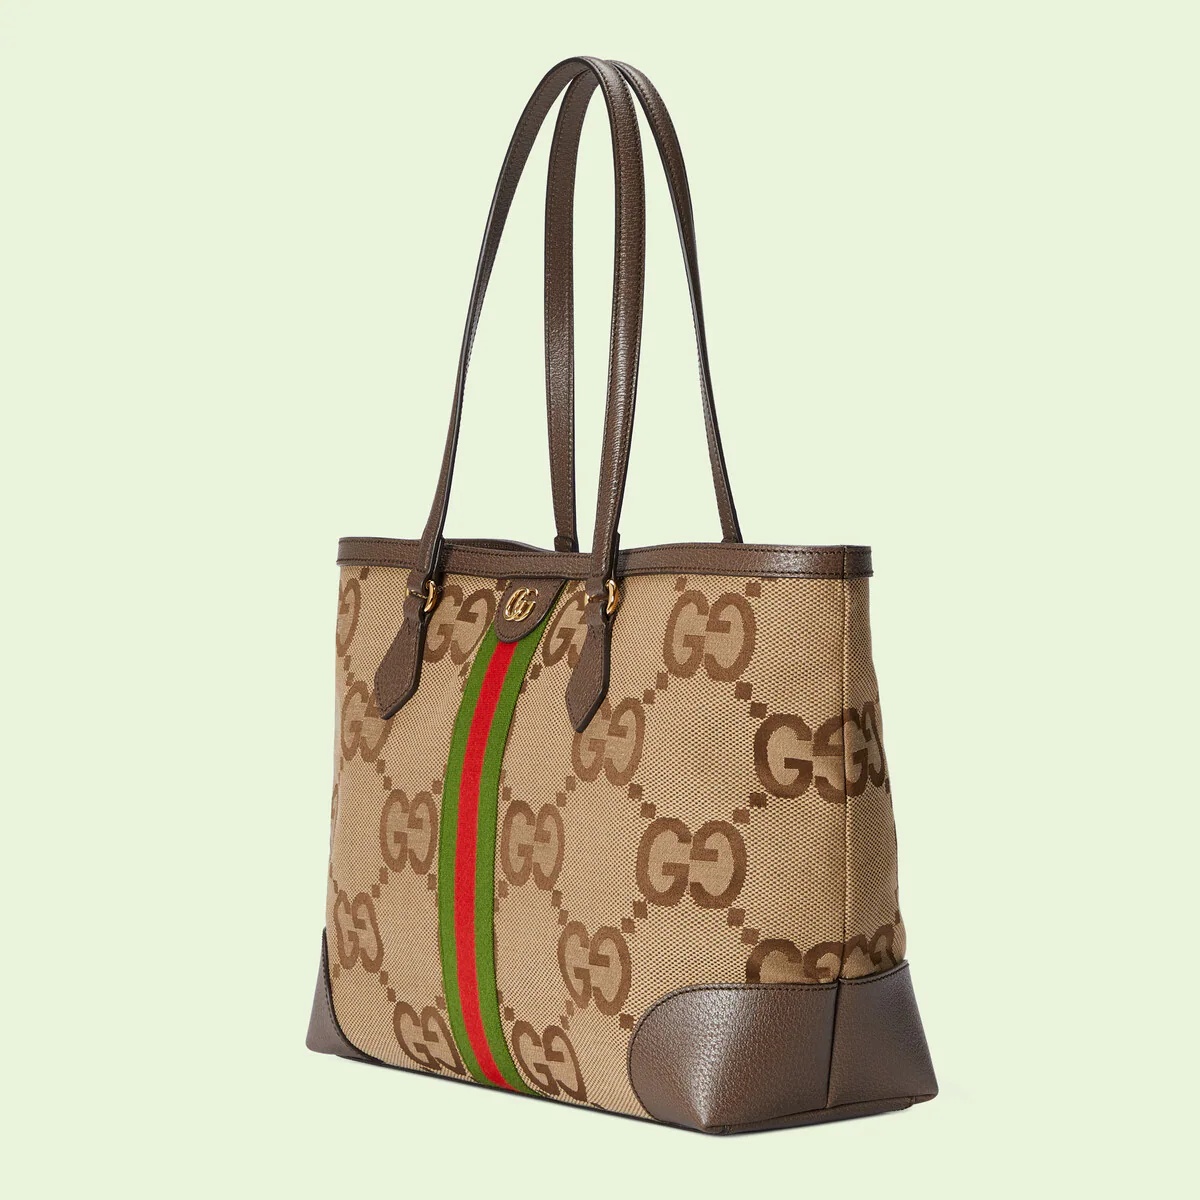 Ophidia Medium GG Tote Bag Green and Natural